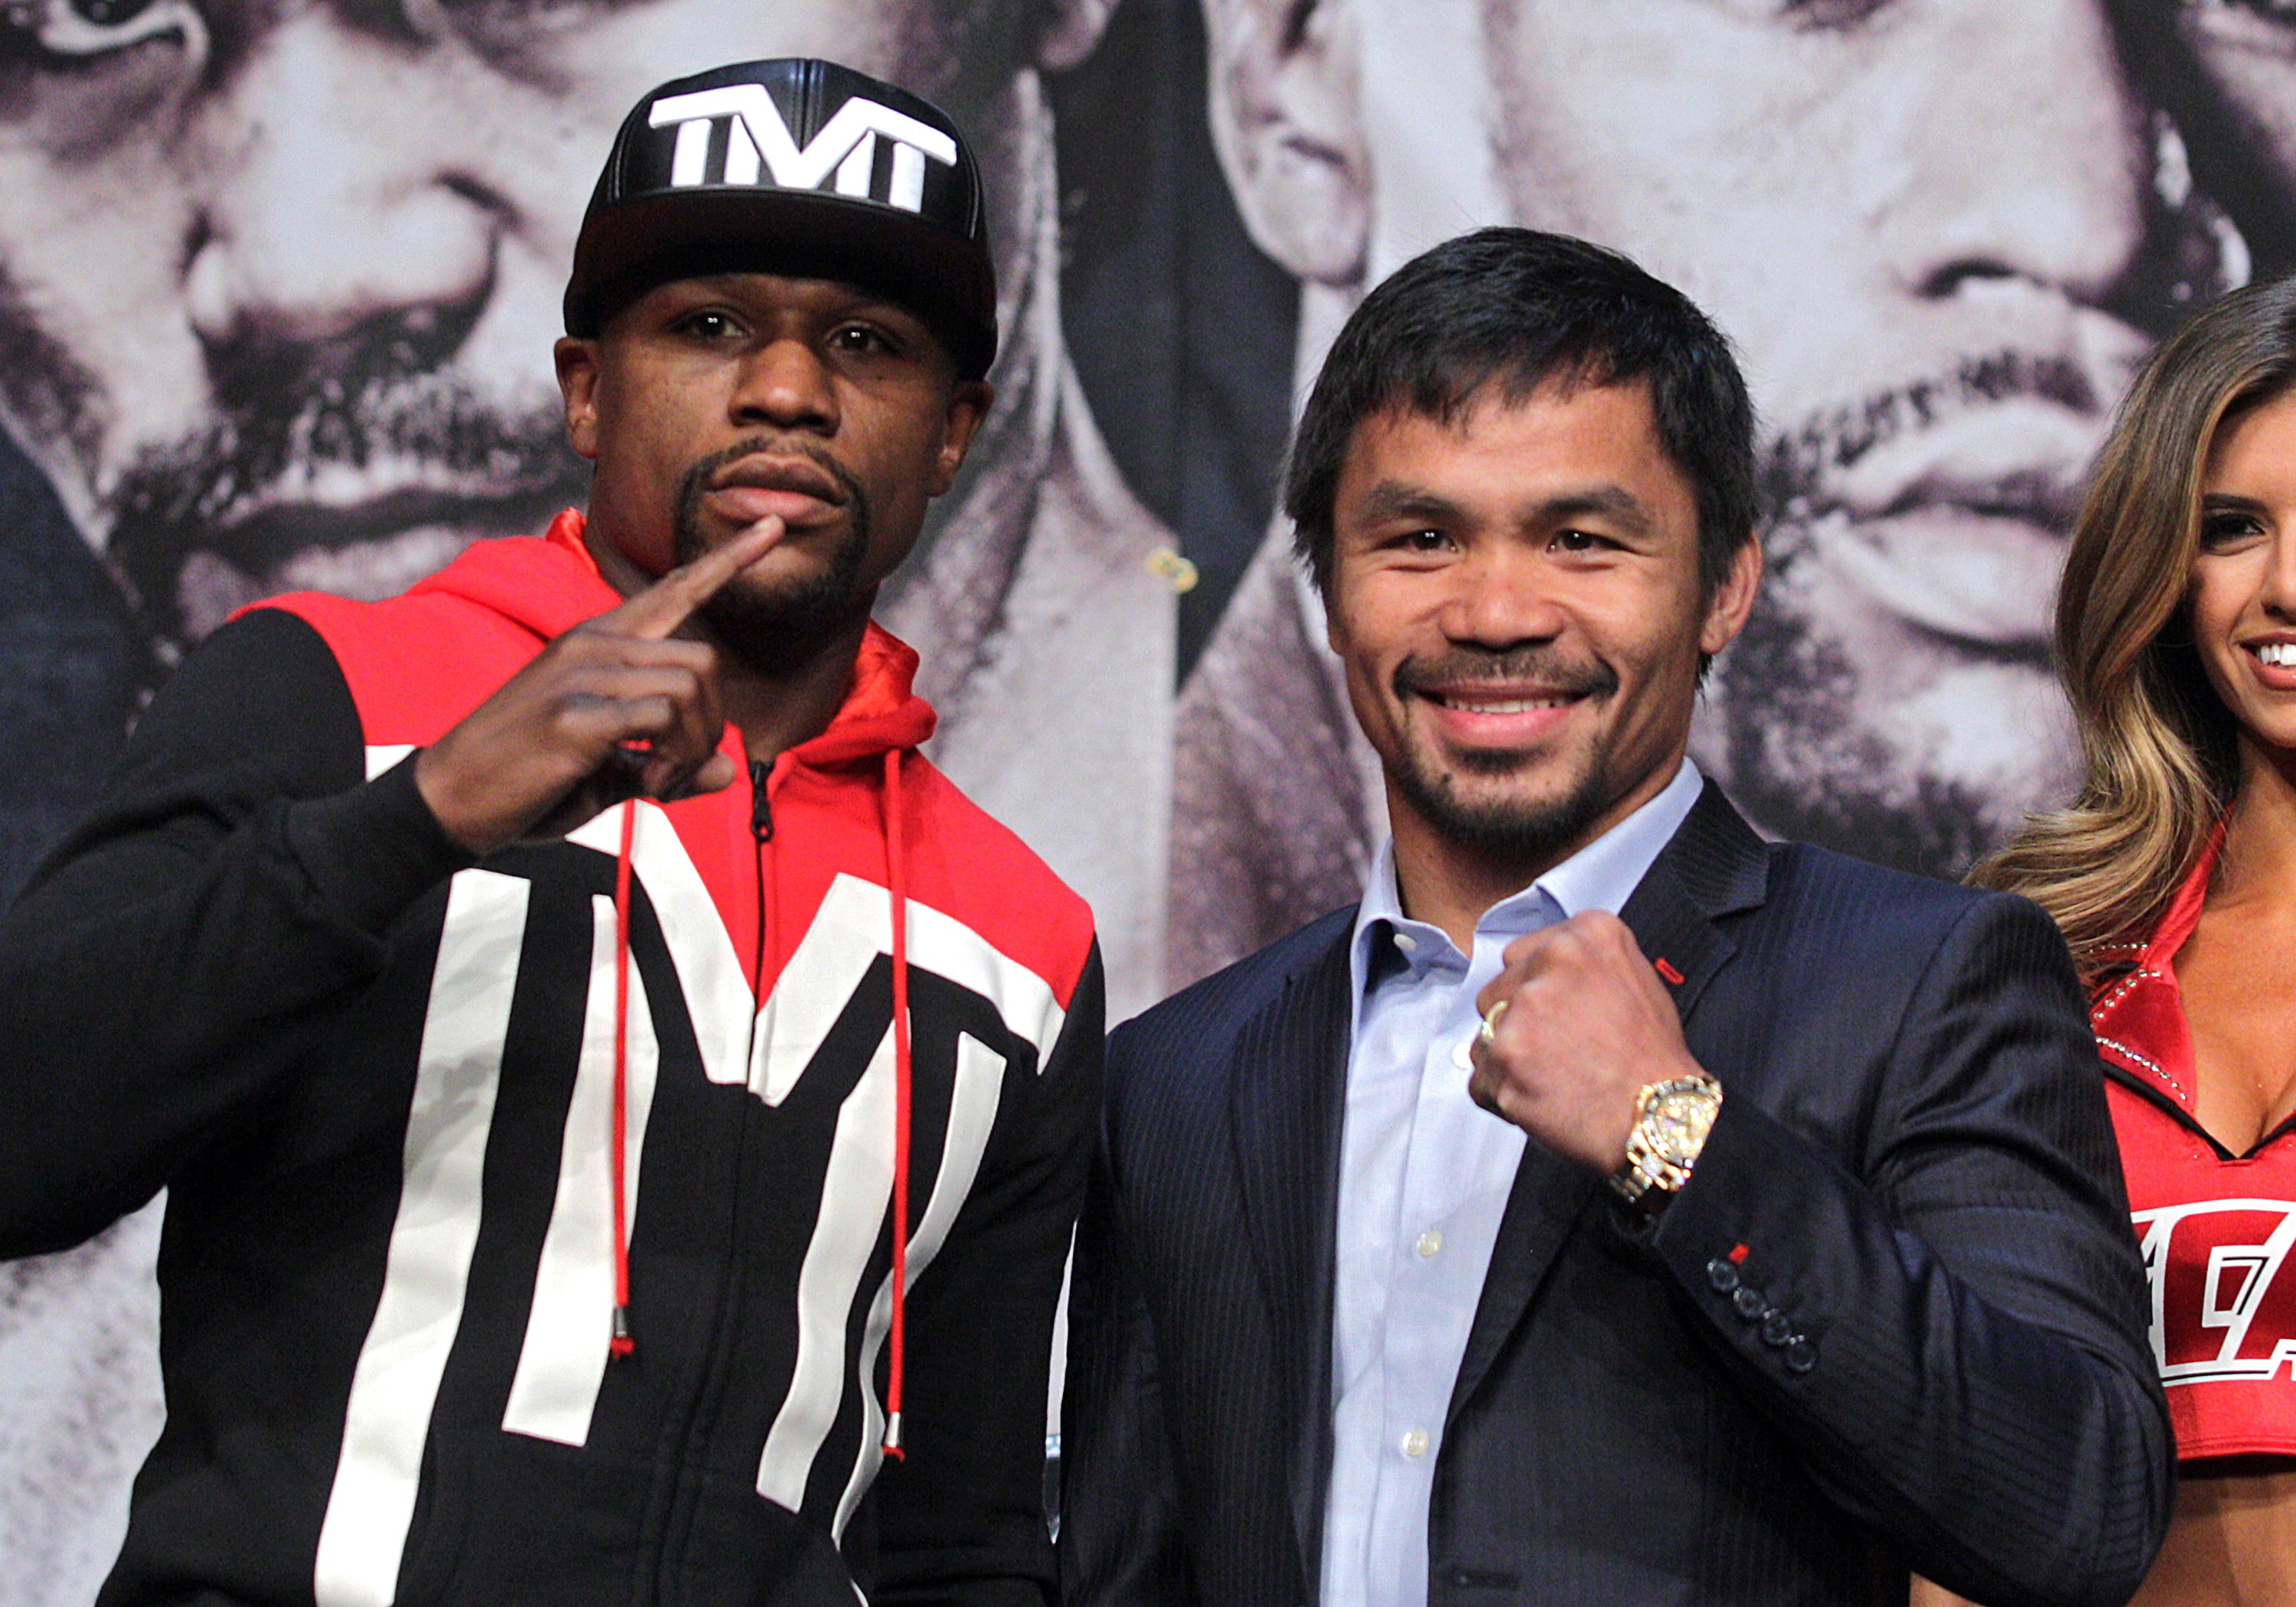 WBC/WBA welterweight champion Floyd Mayweather Jr. (L) and WBO welterweight champion Manny Pacquiao pose during a news conference at the KA Theatre at MGM Grand Hotel & Casino on April 29, 2015 in Las Vegas, Nevada. (John Gurzinski—AFP/Getty Images)